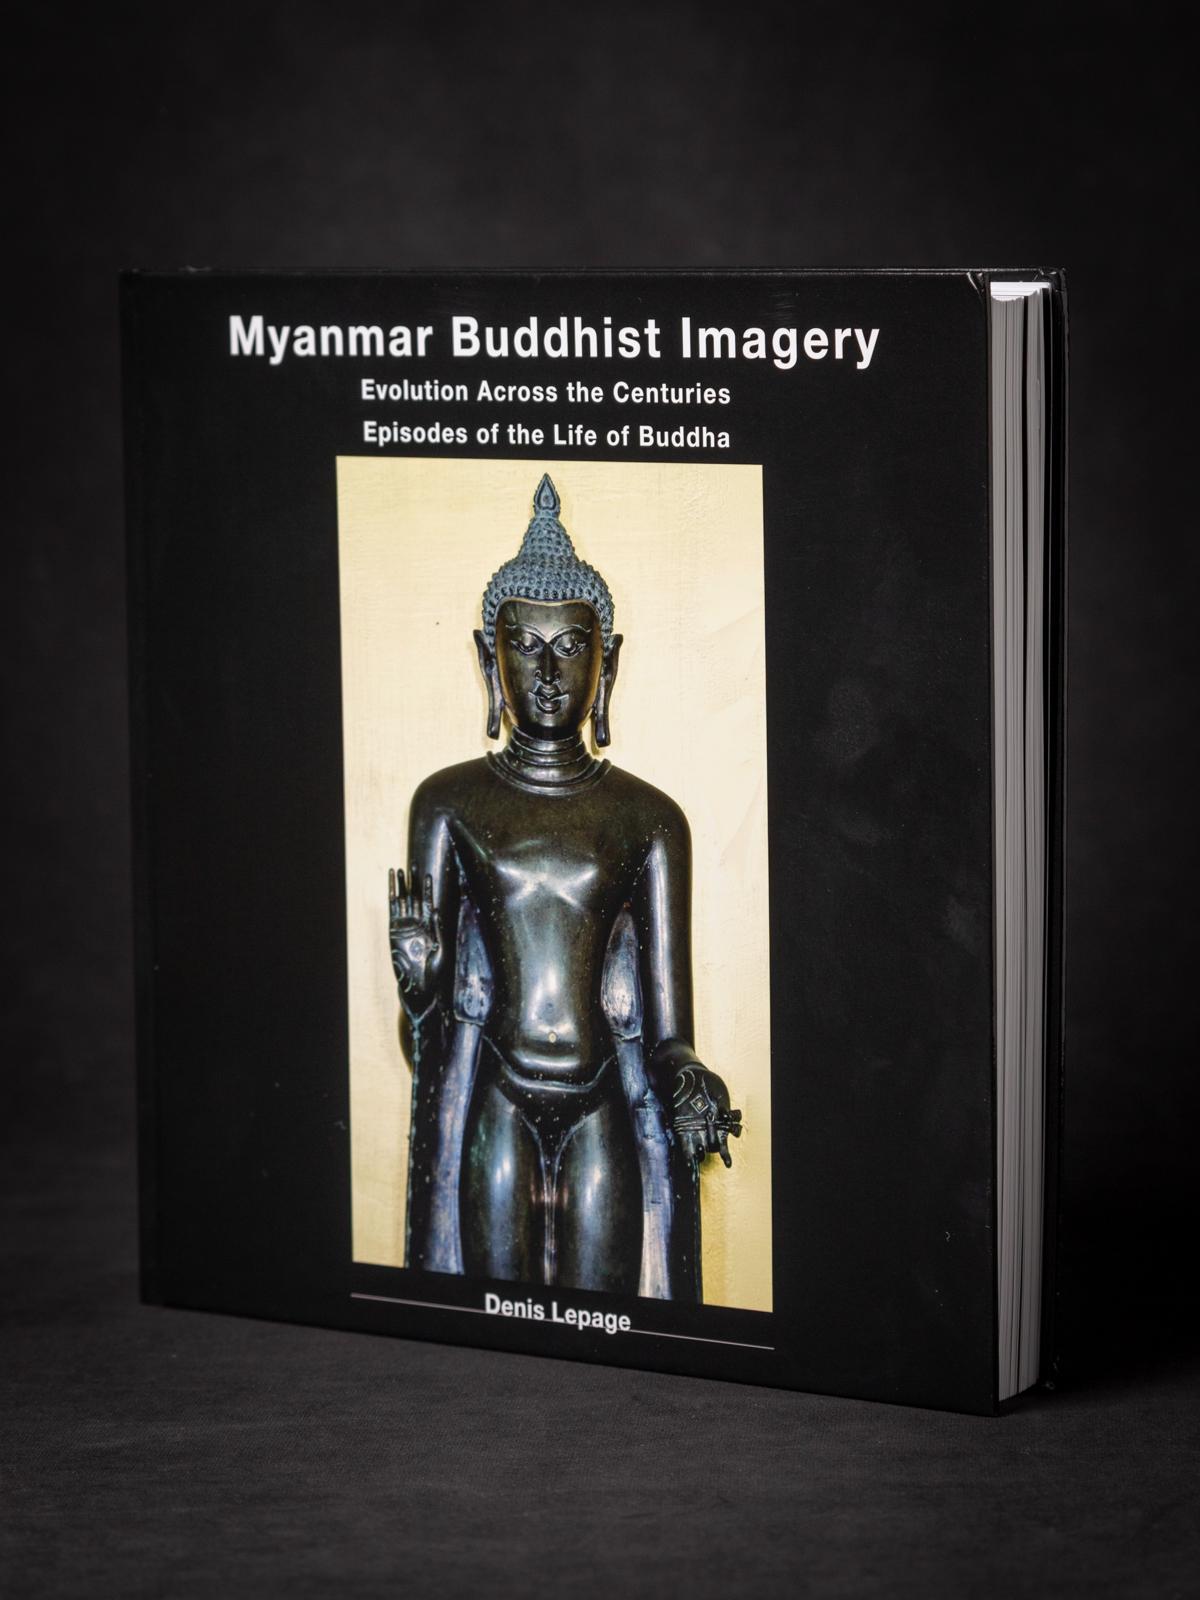 Material: Book
3 cm high
26 cm wide and 26 cm high
A great up-to-date view and correct book of Myanmar Buddhist arts with lots of high quality images and correct descriptions
With lots of unique and beautiful images of statues from several National